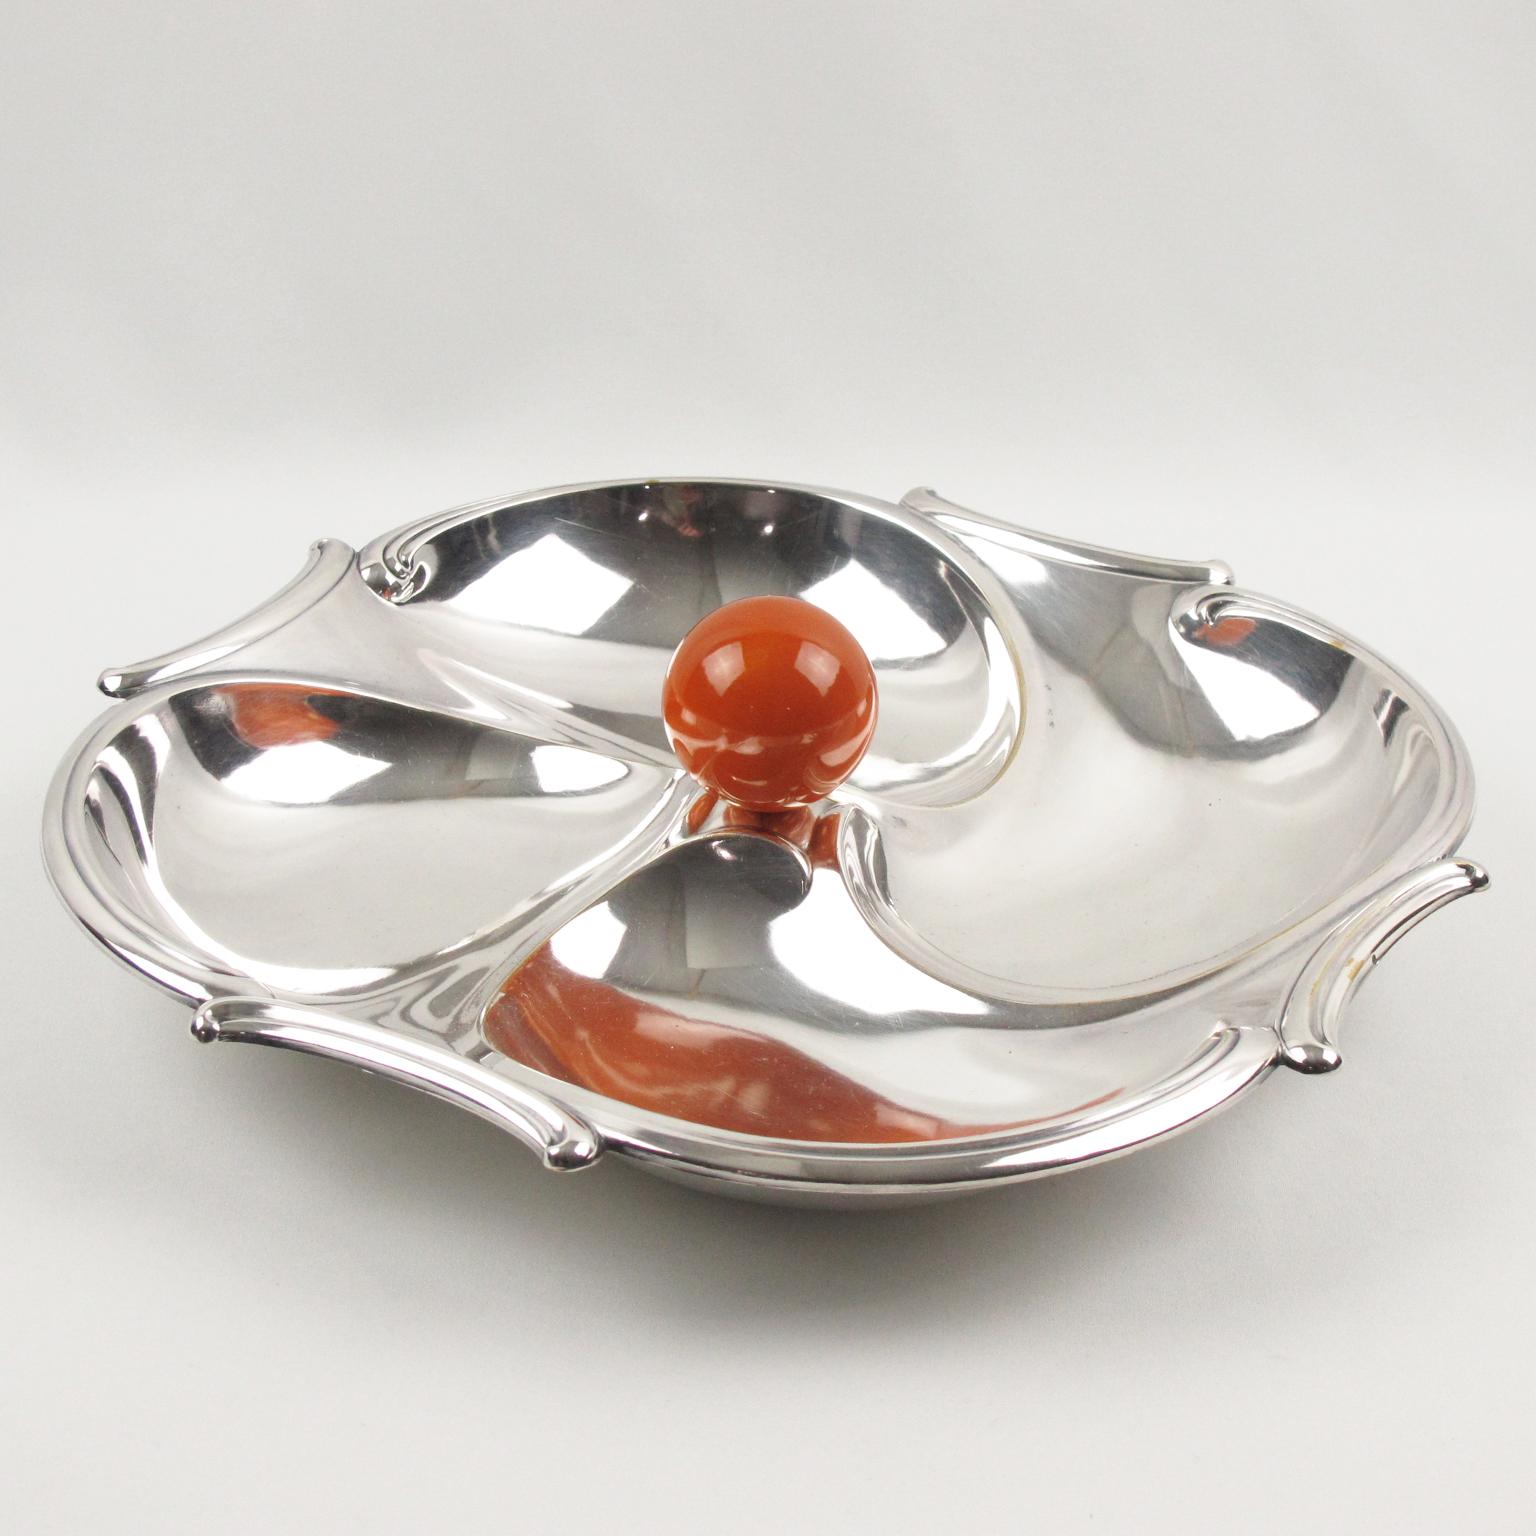 French Art Deco Cocktail Silver Plate and Bakelite Barware Tray Set, 1930s